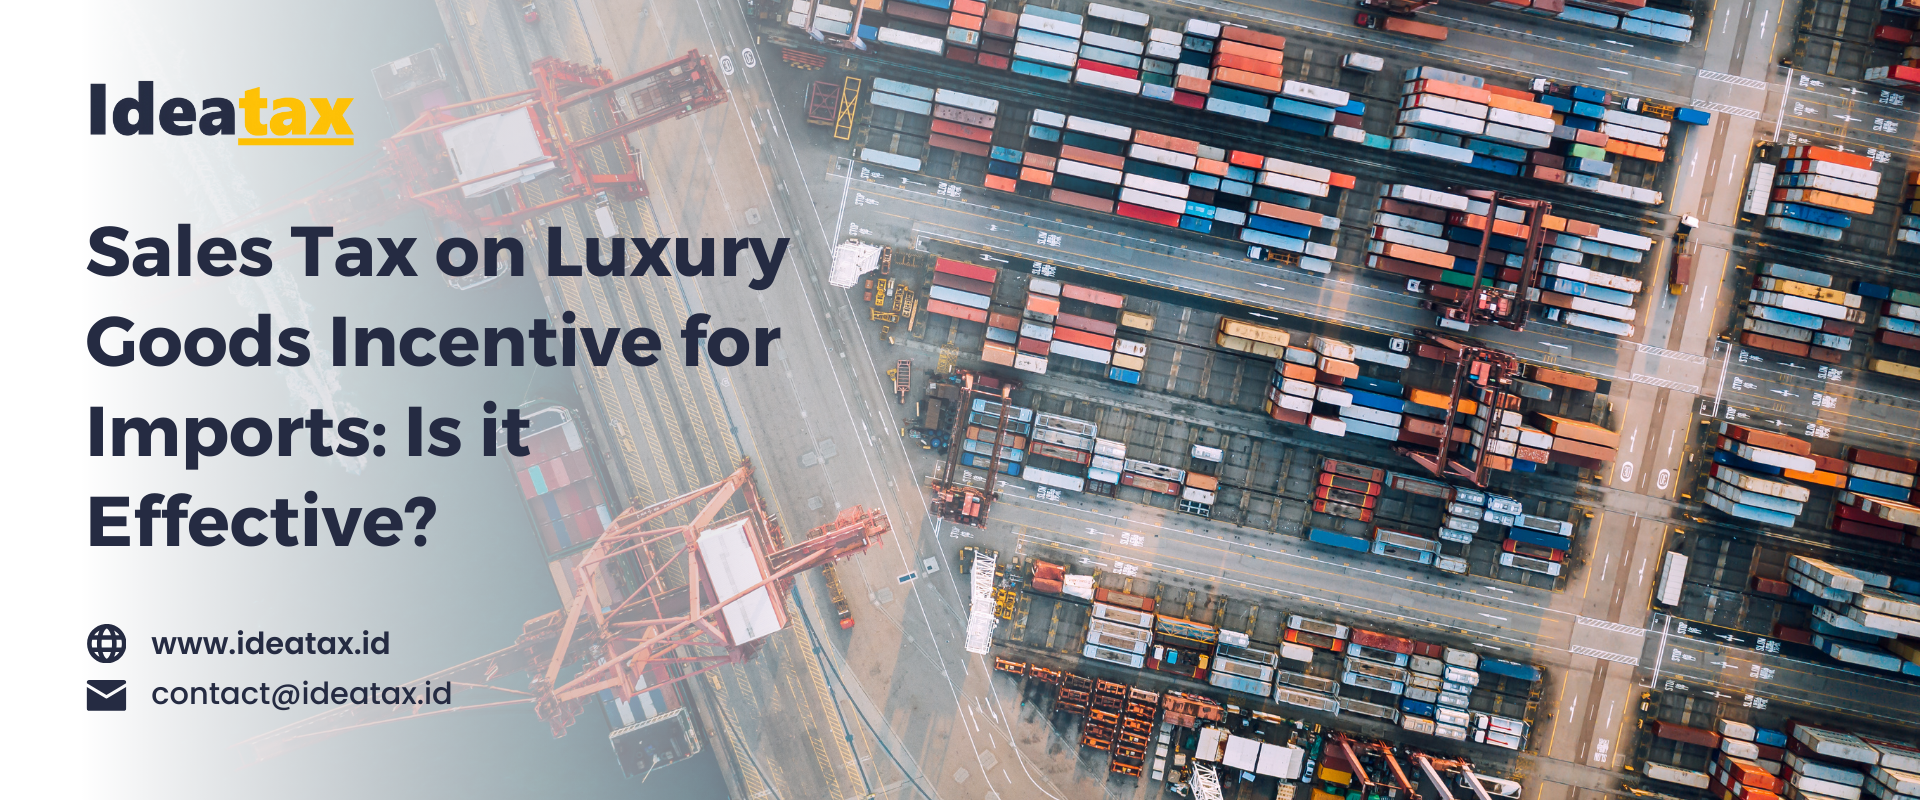 Sales Tax on Luxury Goods Incentive for Imports: Is it Effective?